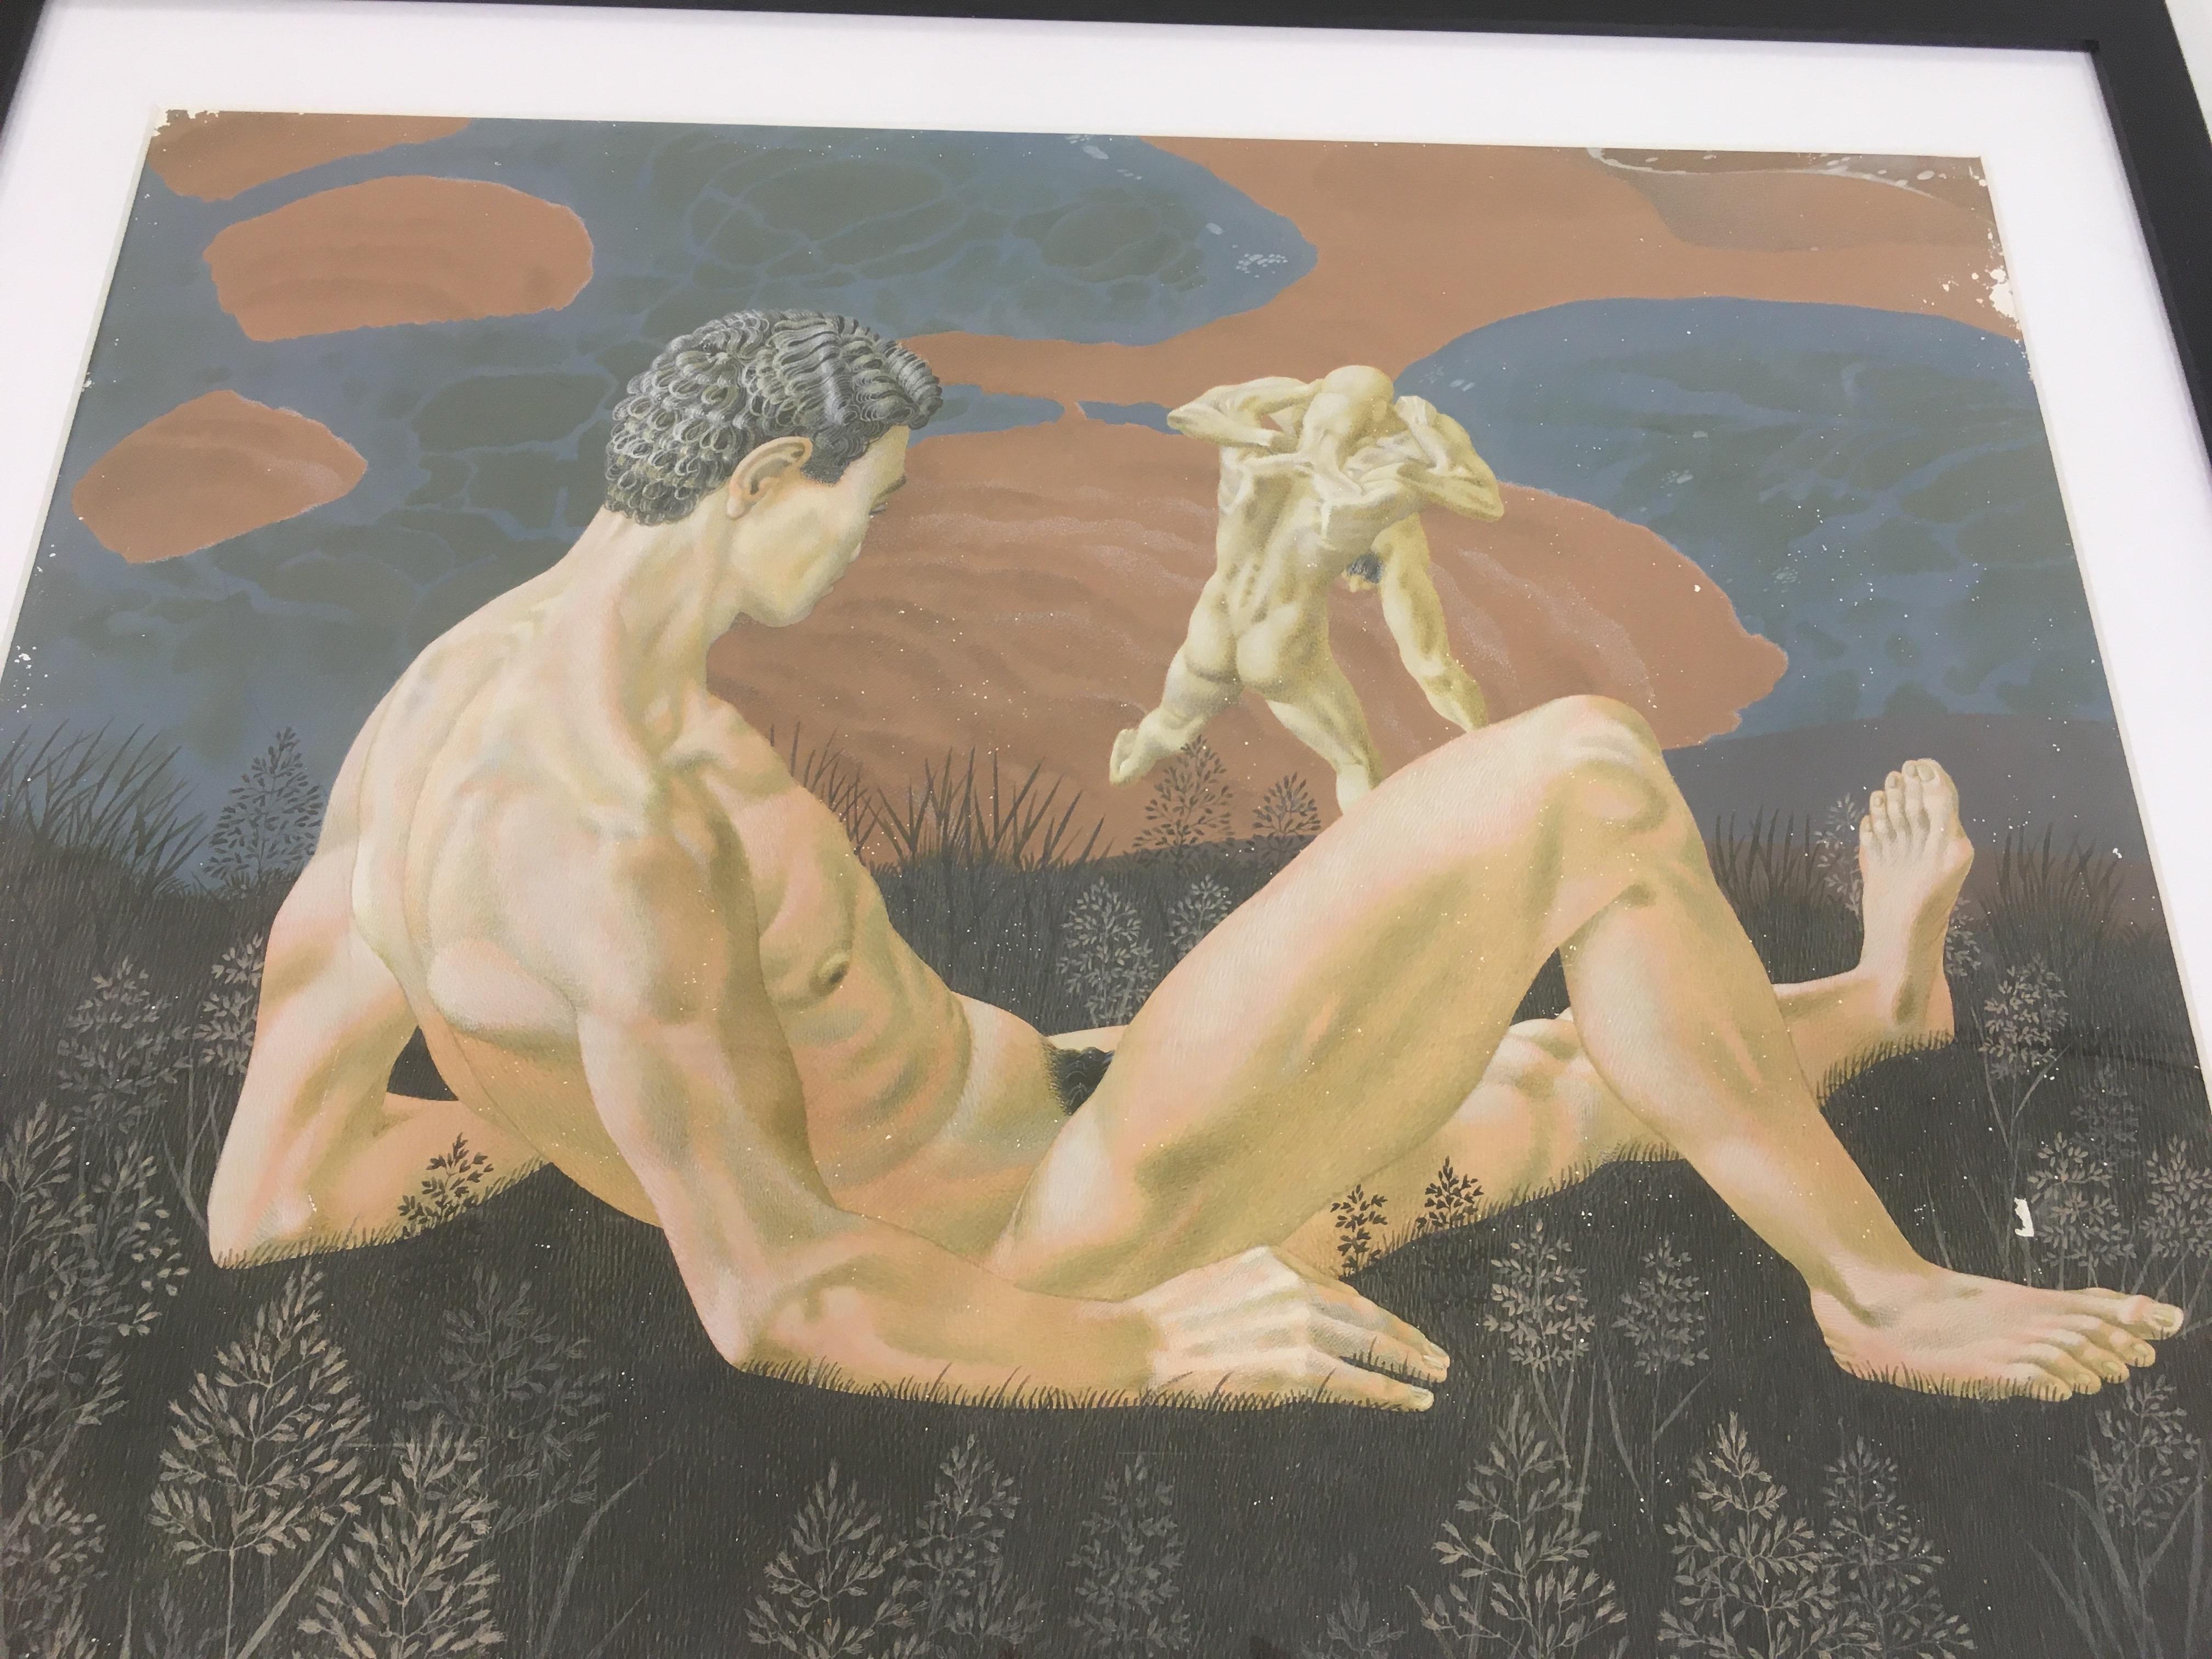 Painting of male nudes
By Francis Plummer
Executed in egg tempera on board
Dated 1964
British.
 